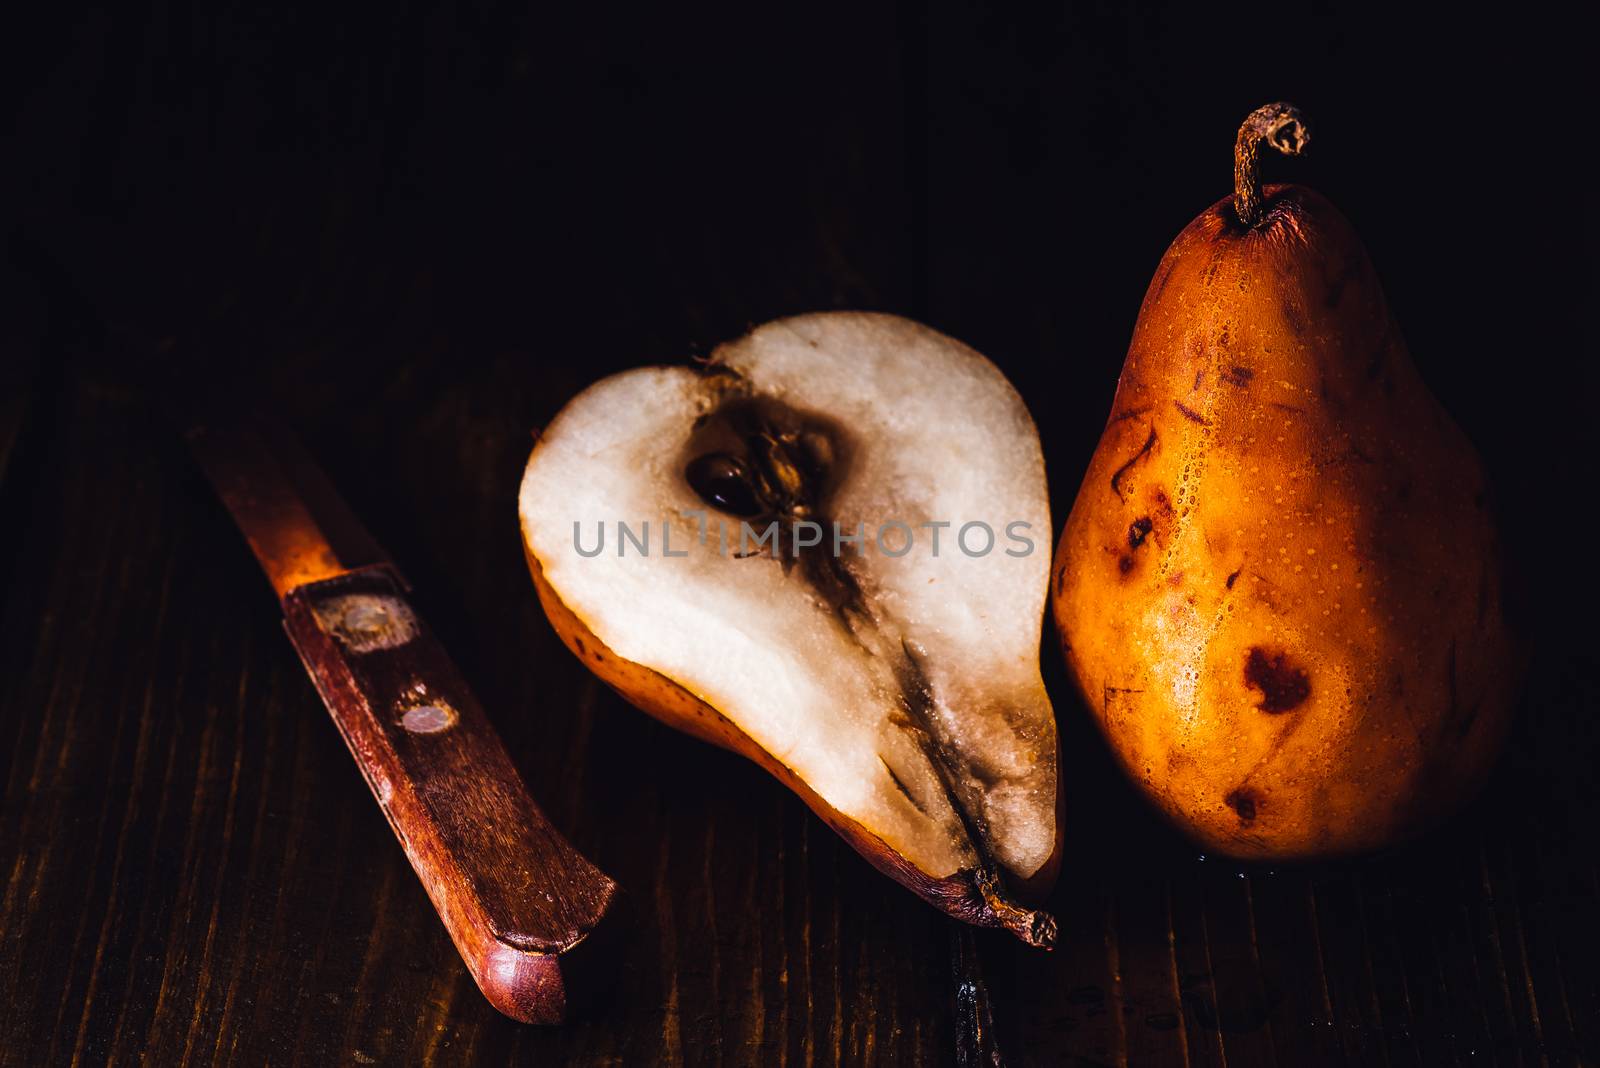 Golden Pear with Half and Knife by Seva_blsv